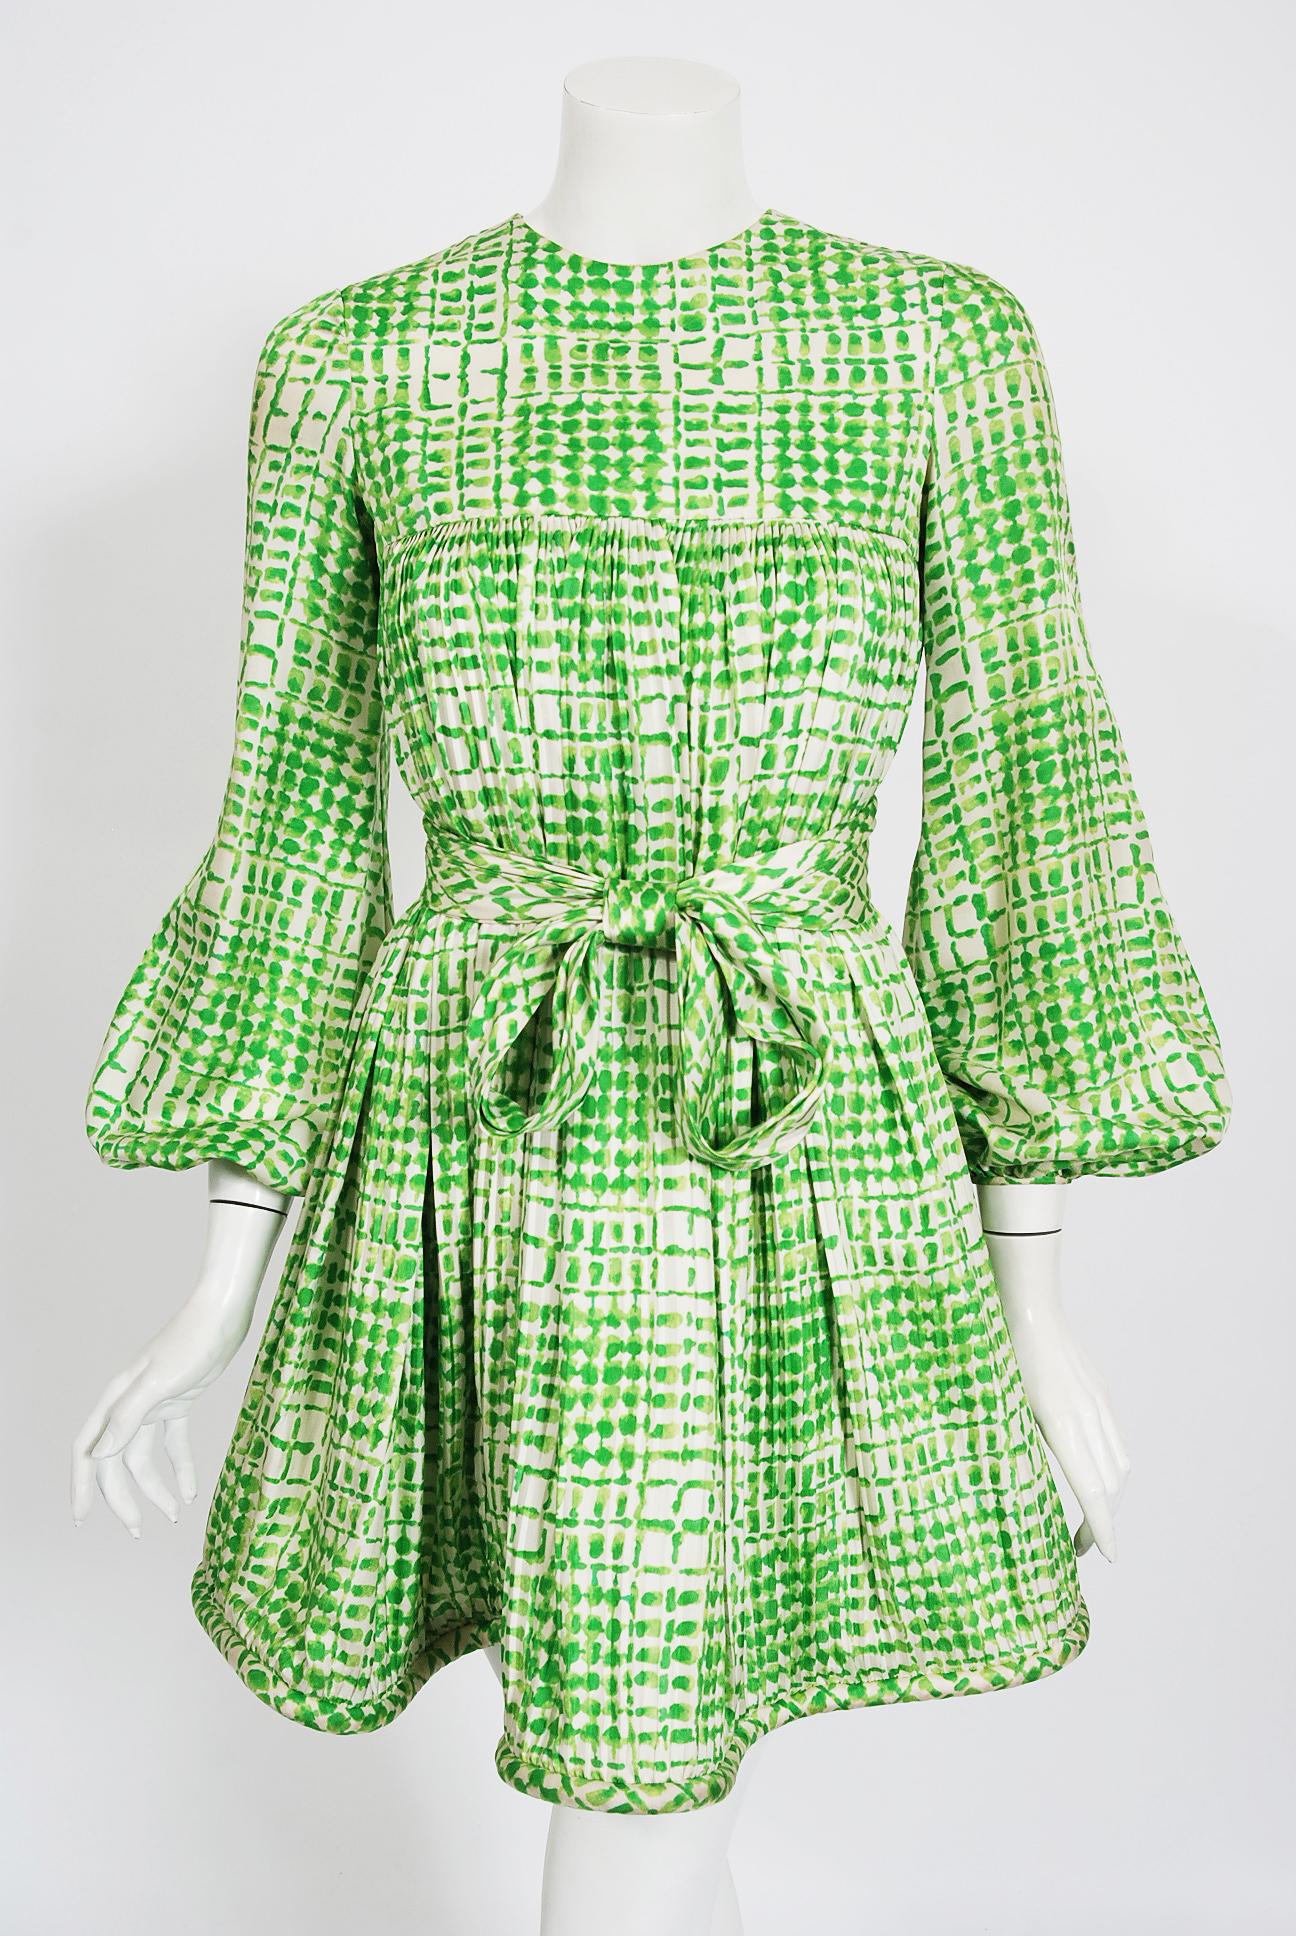 Spectacular Pierre Cardin graphic green and white print silk mod dress dating back to his 1967 collection. In 1951 Cardin opened his own couture house and by 1957, he started a ready-to-wear line; a bold move for a French couturier at the time. This